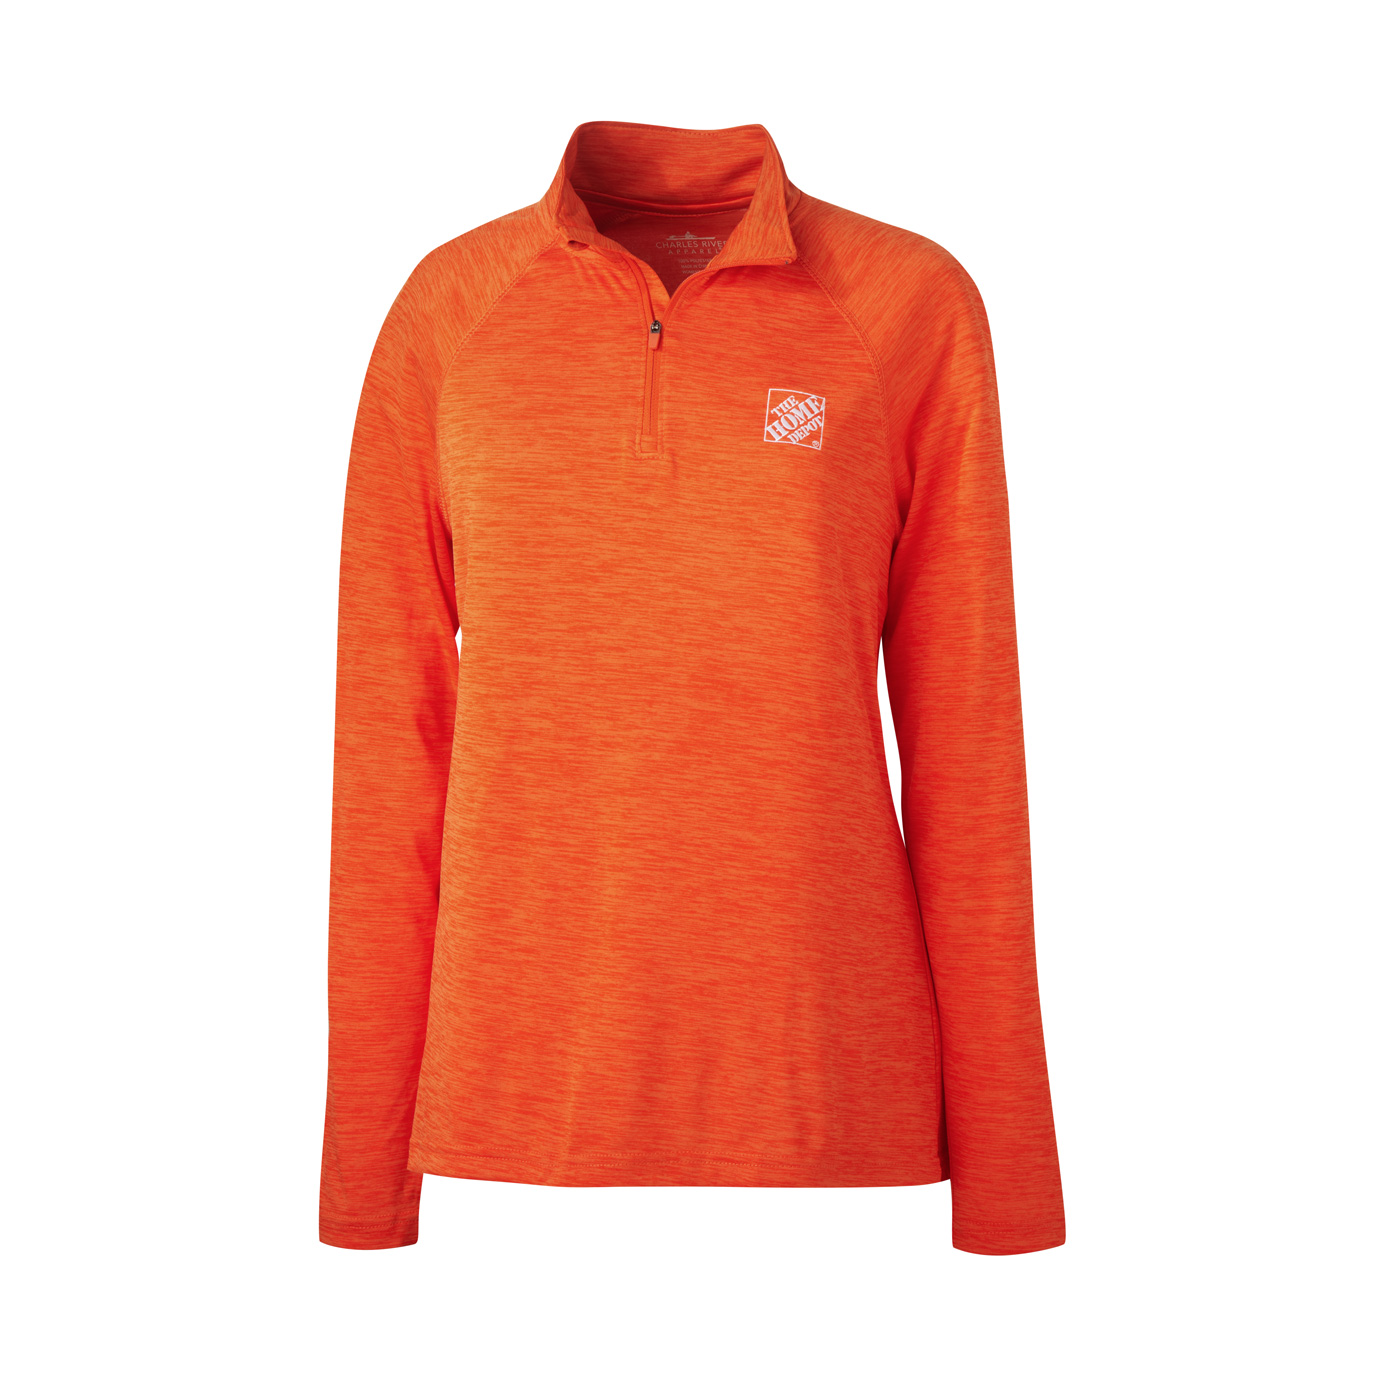 Ladies Space Dyed Quarter Zip Performance Pullover Thdgear